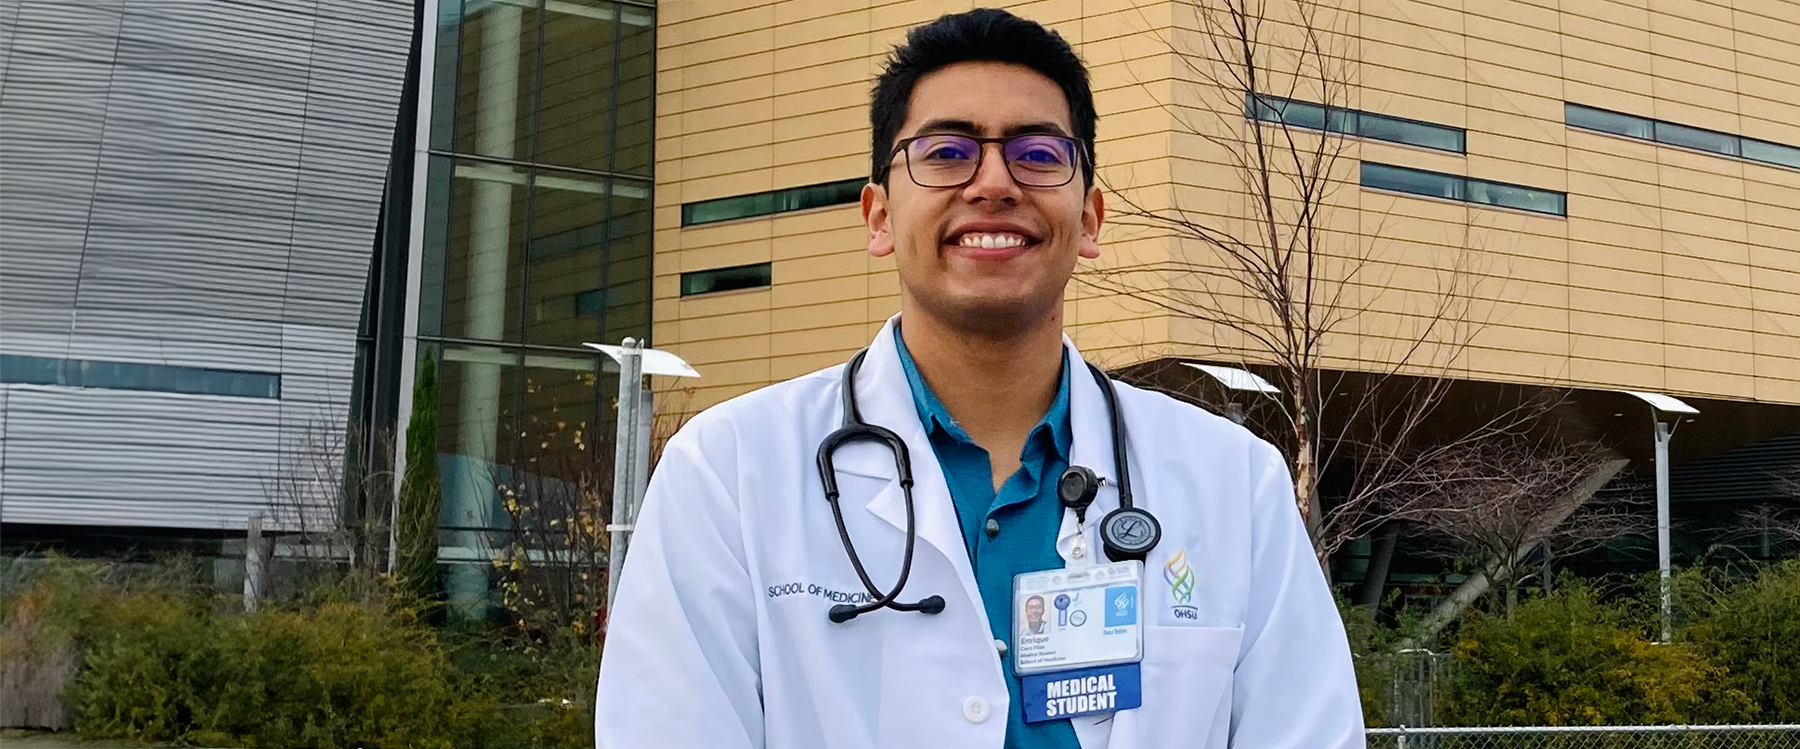 Medical student’s passion for connection inspires health equity goals